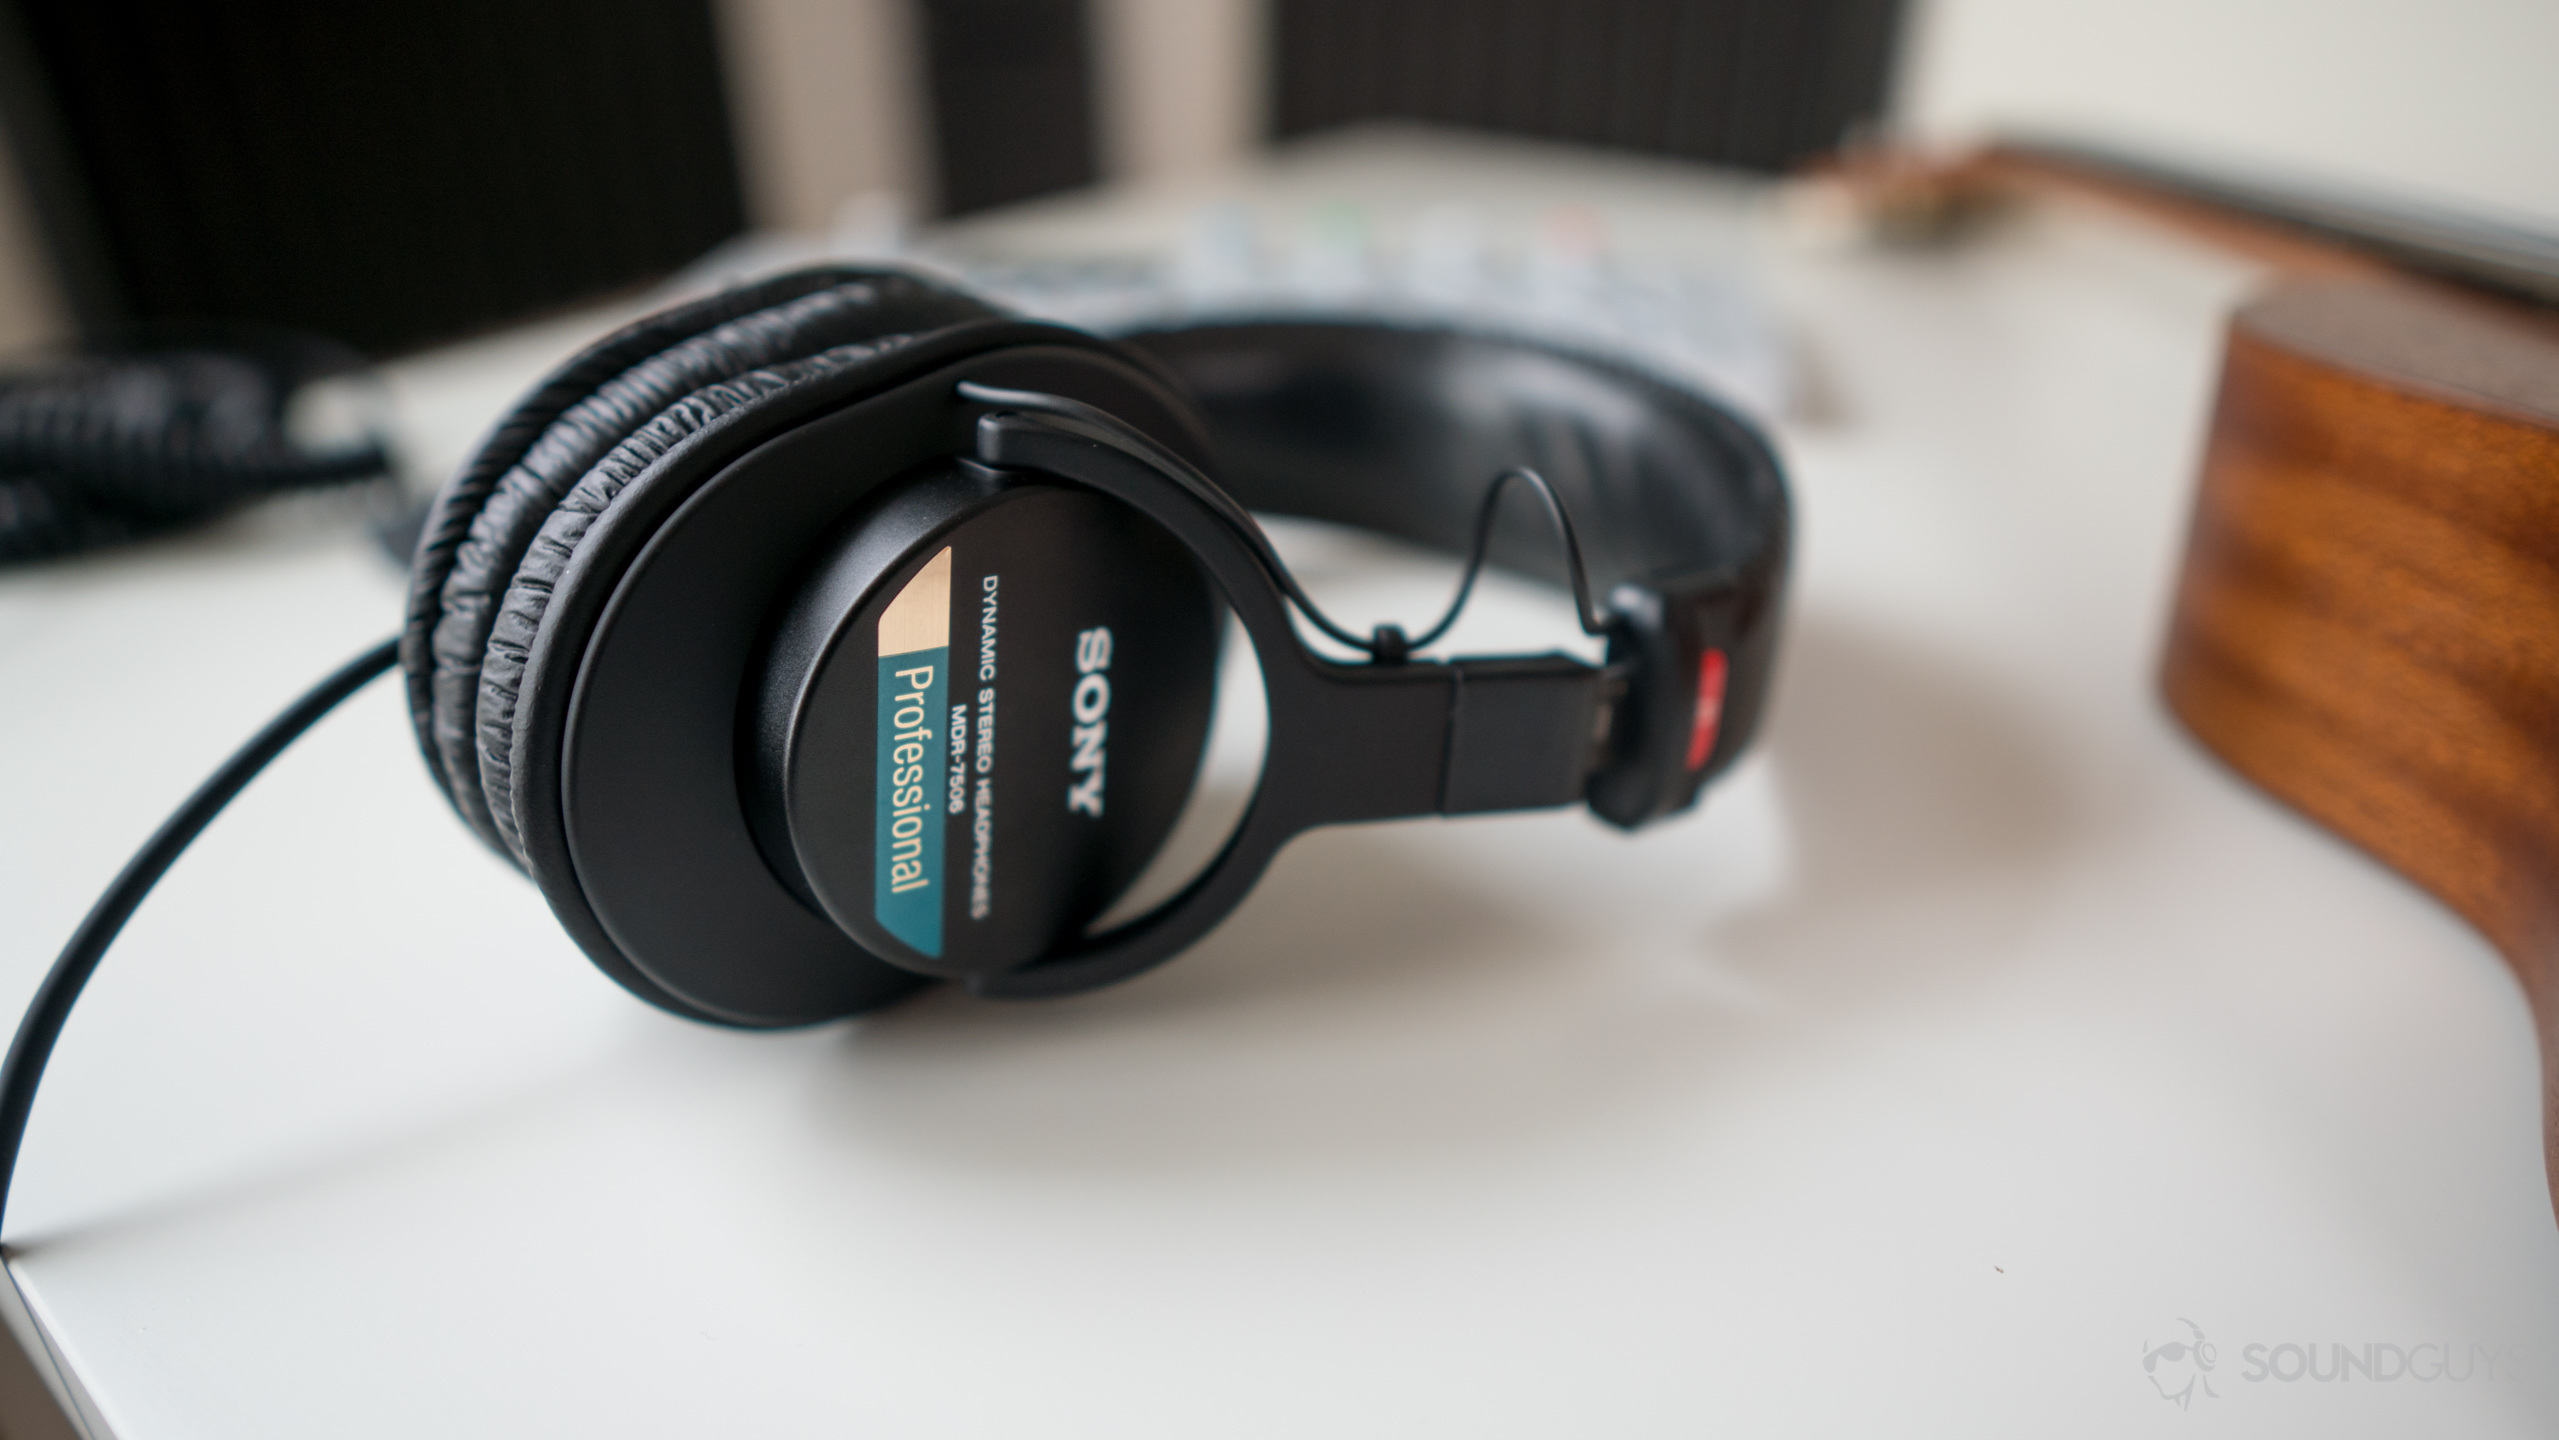 The MDR-7506 headphones lying on a table